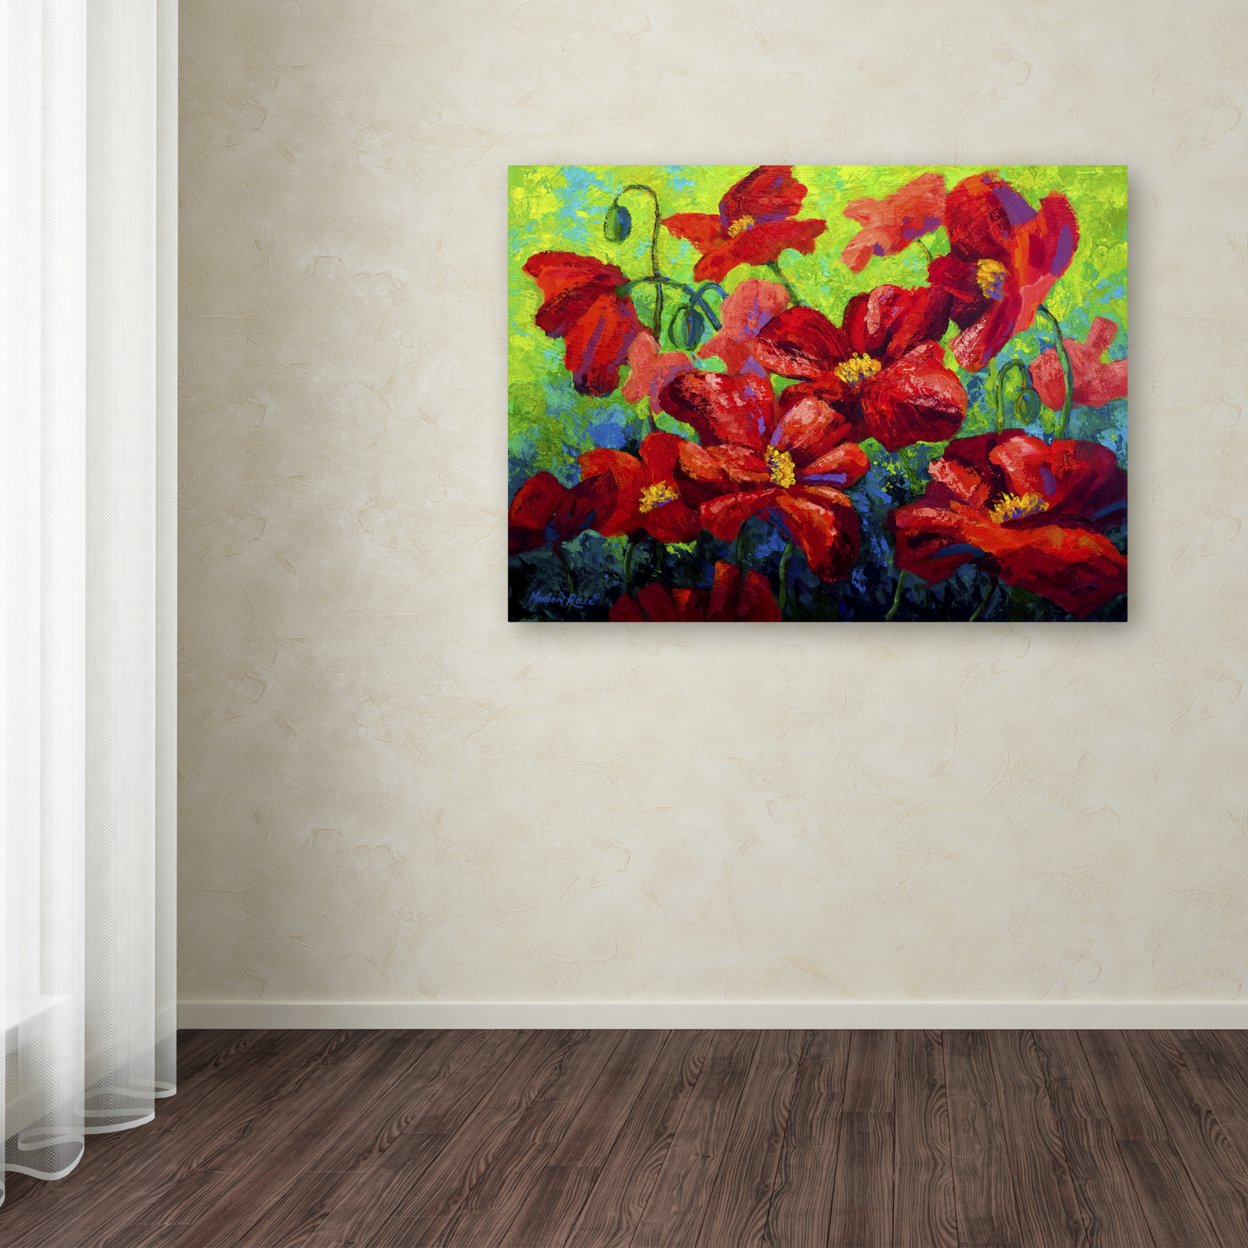 Marion Rose 'Field Of Poppies A' Ready To Hang Canvas Art 35 X 47 Inches Made In USA